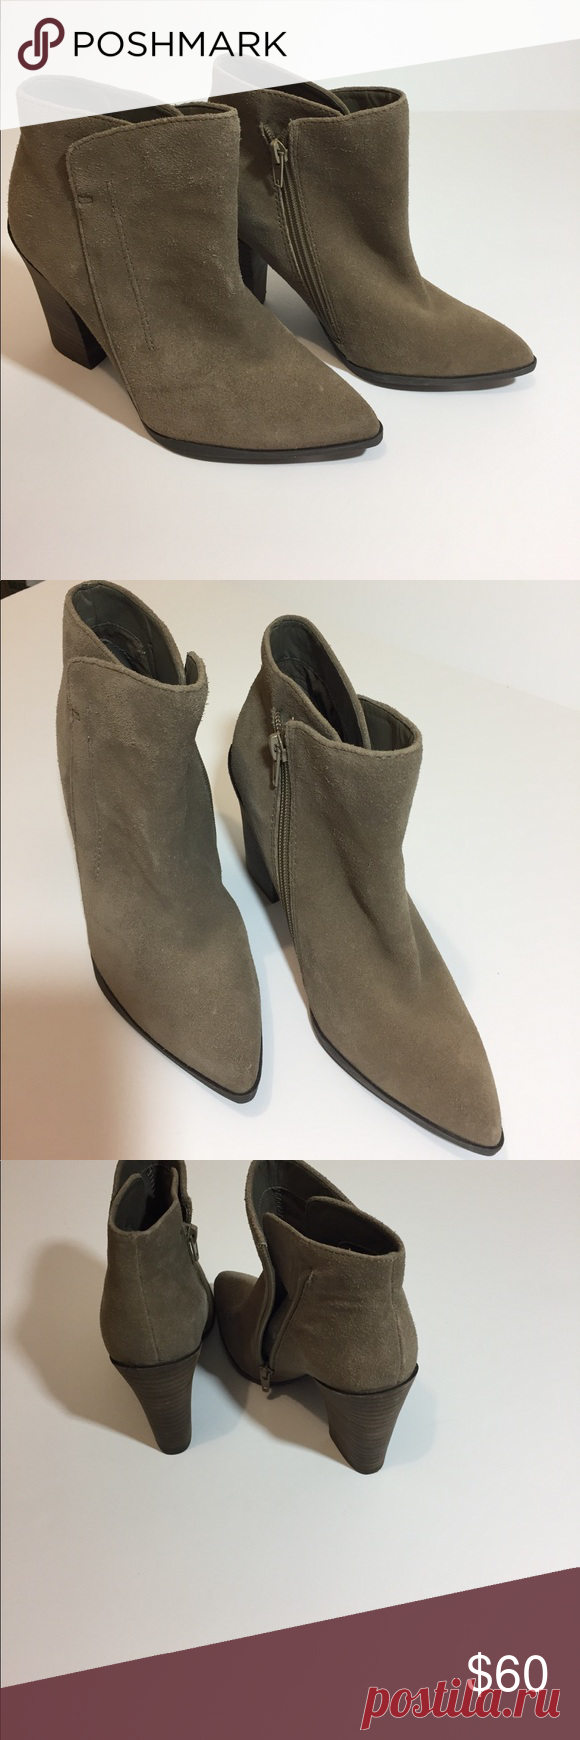 NWT Guess Suede Ankle Boots New size 6 and 6.5 Guess Shoes Ankle Boots & Booties